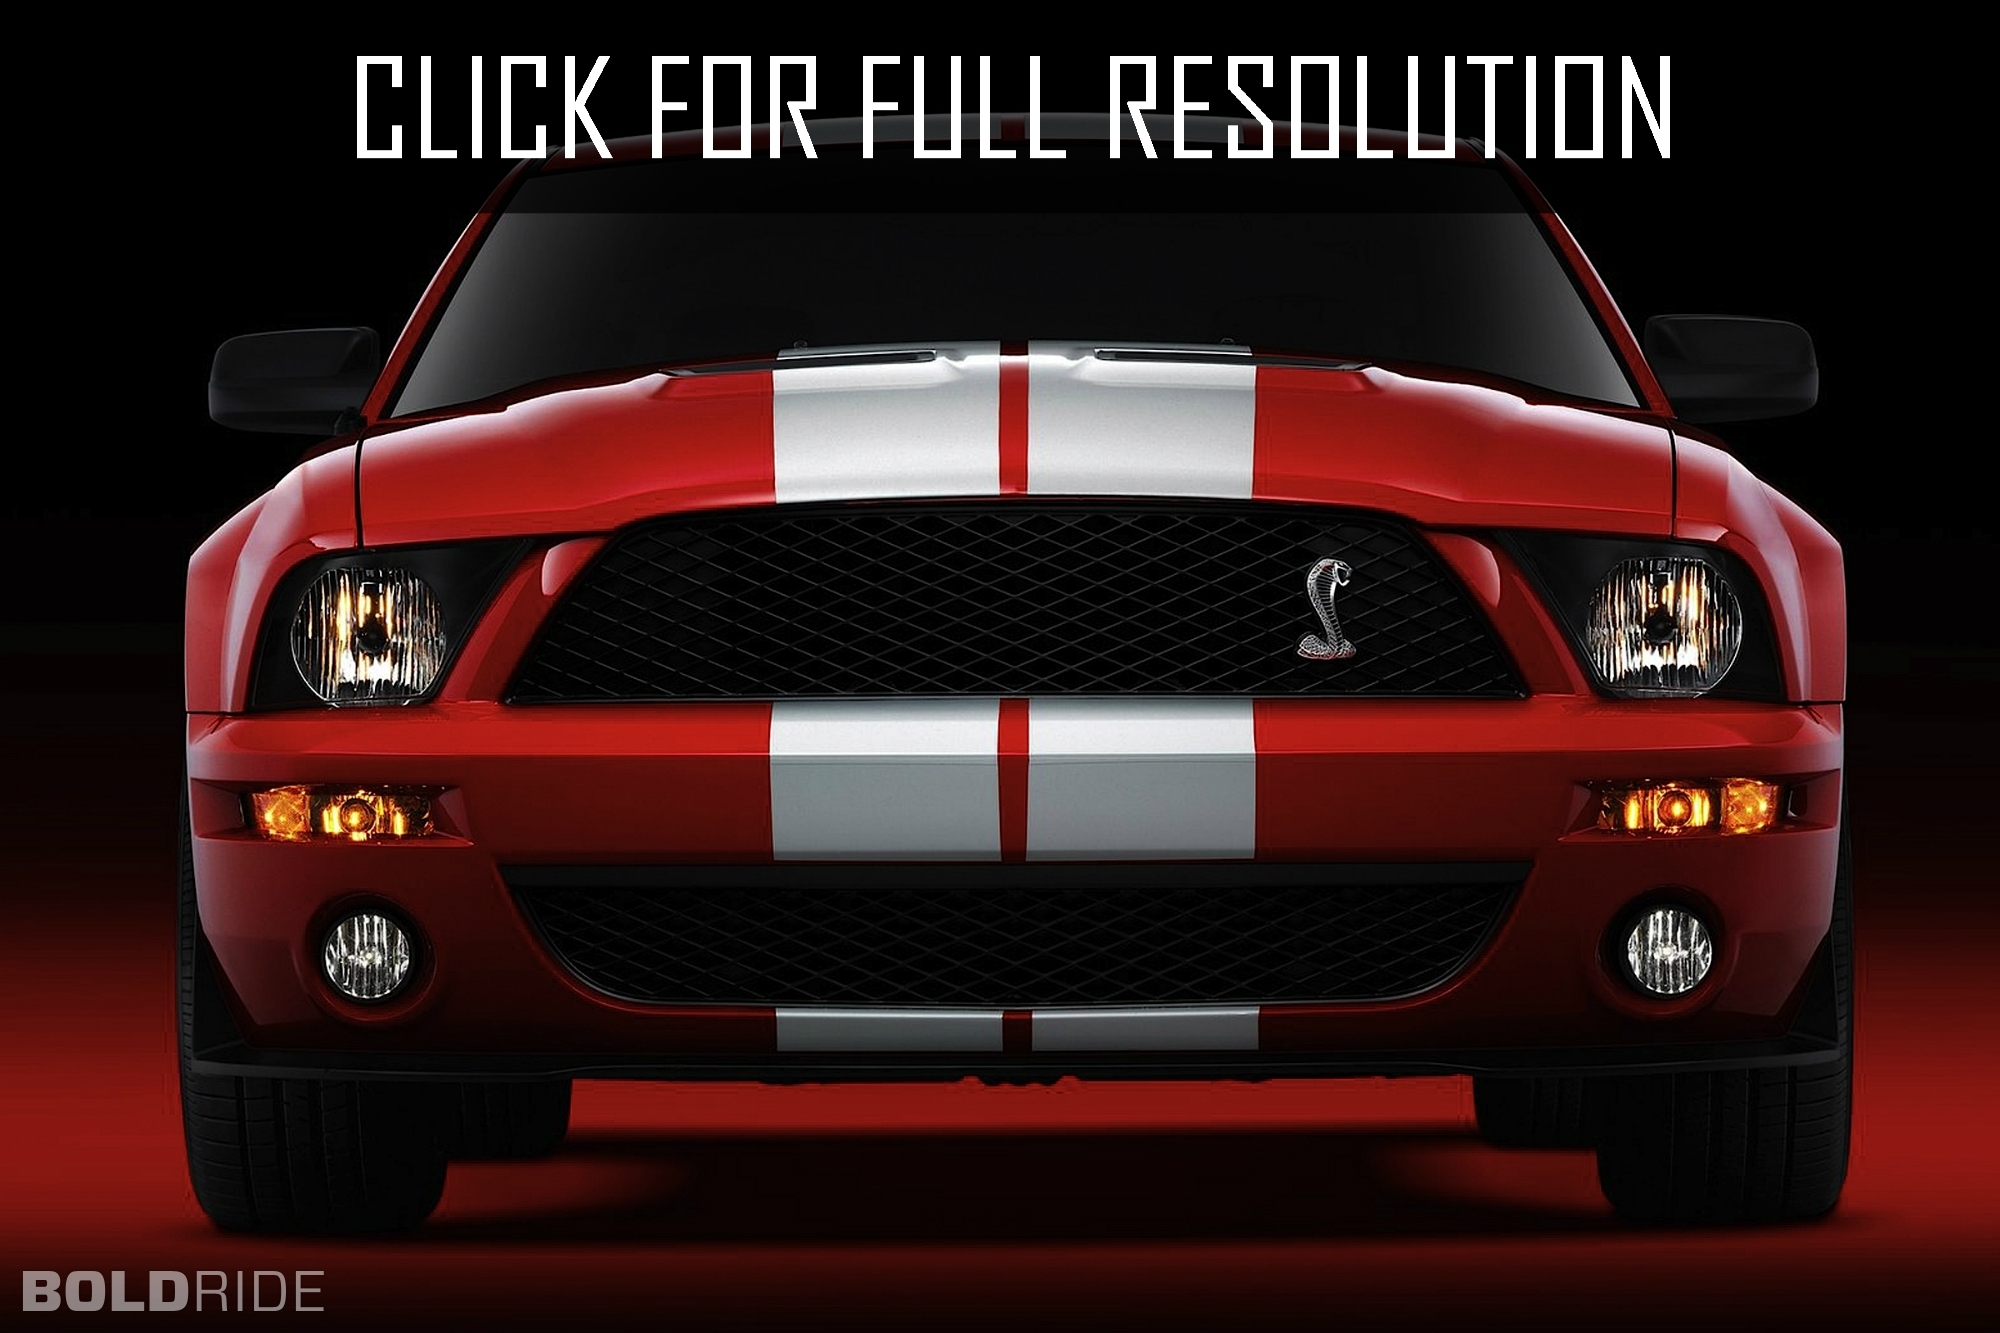 2008 Ford Mustang Shelby Gt500